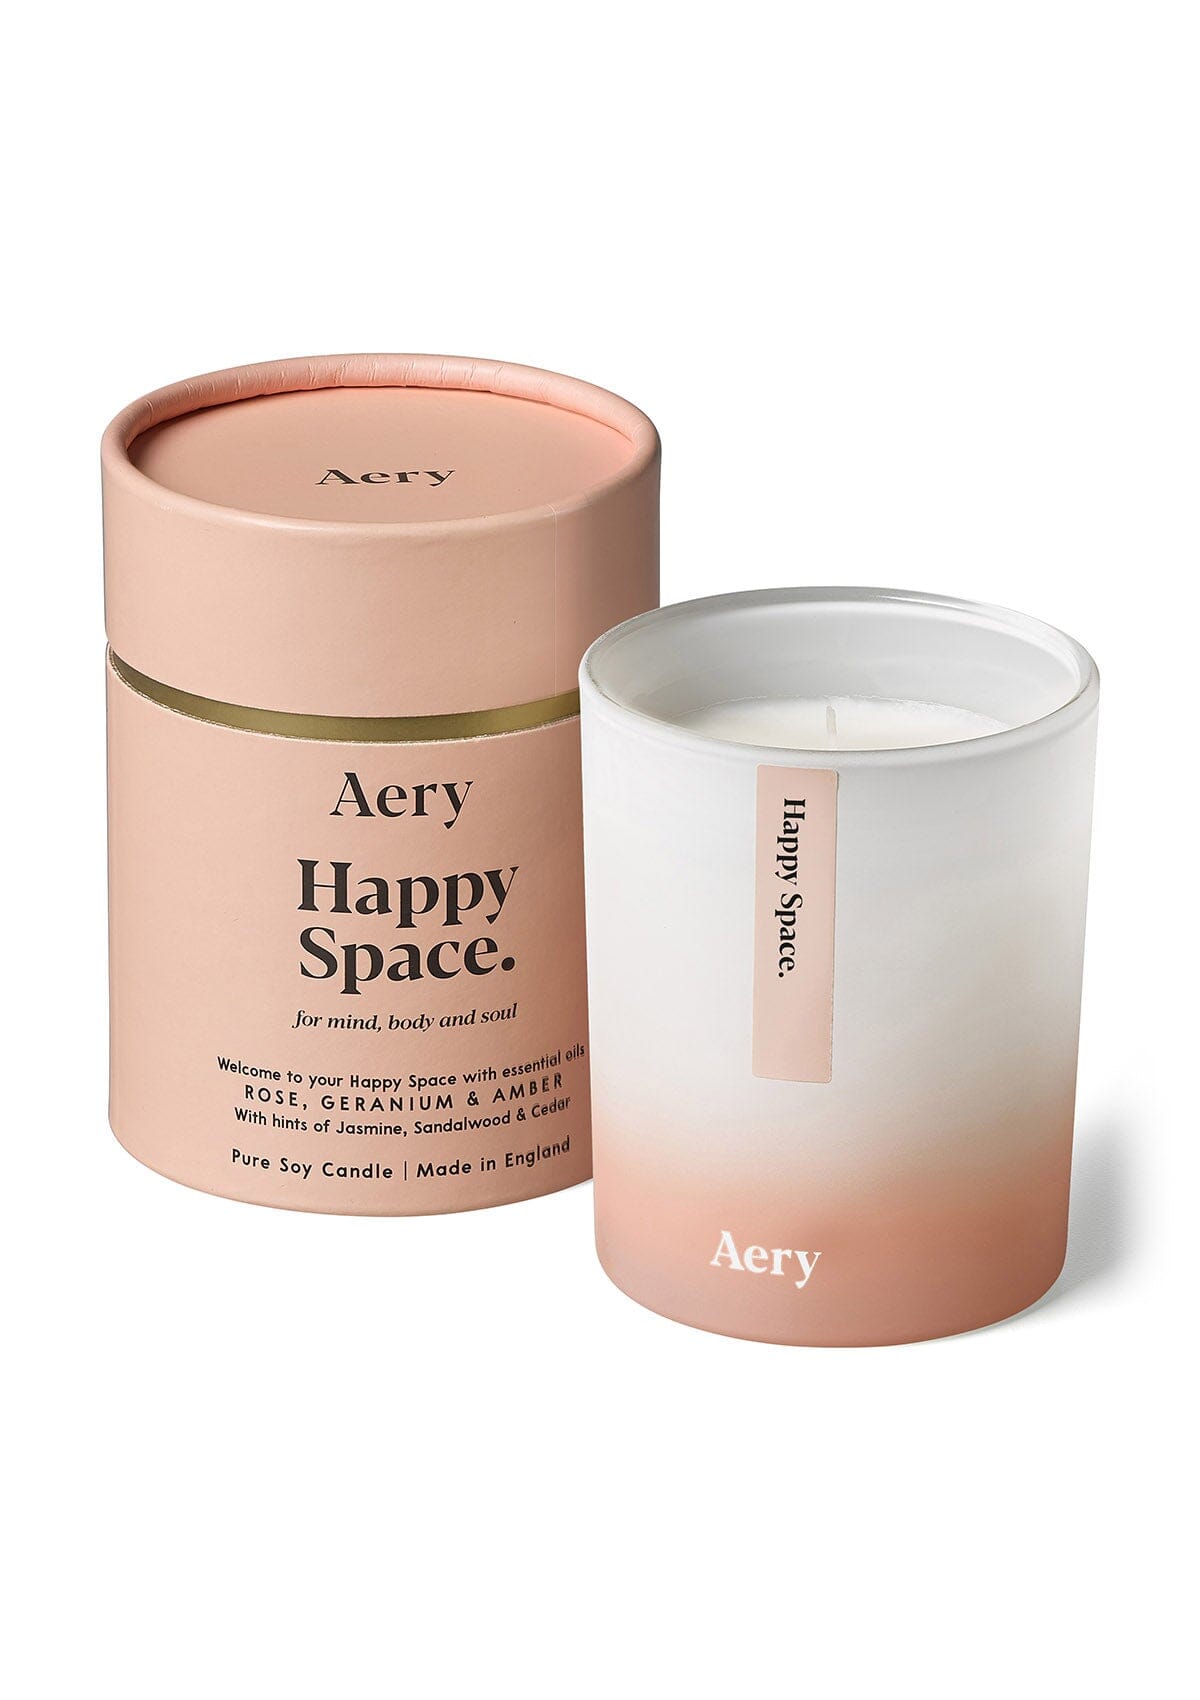 pink happy space candle with product packaging by Aery 